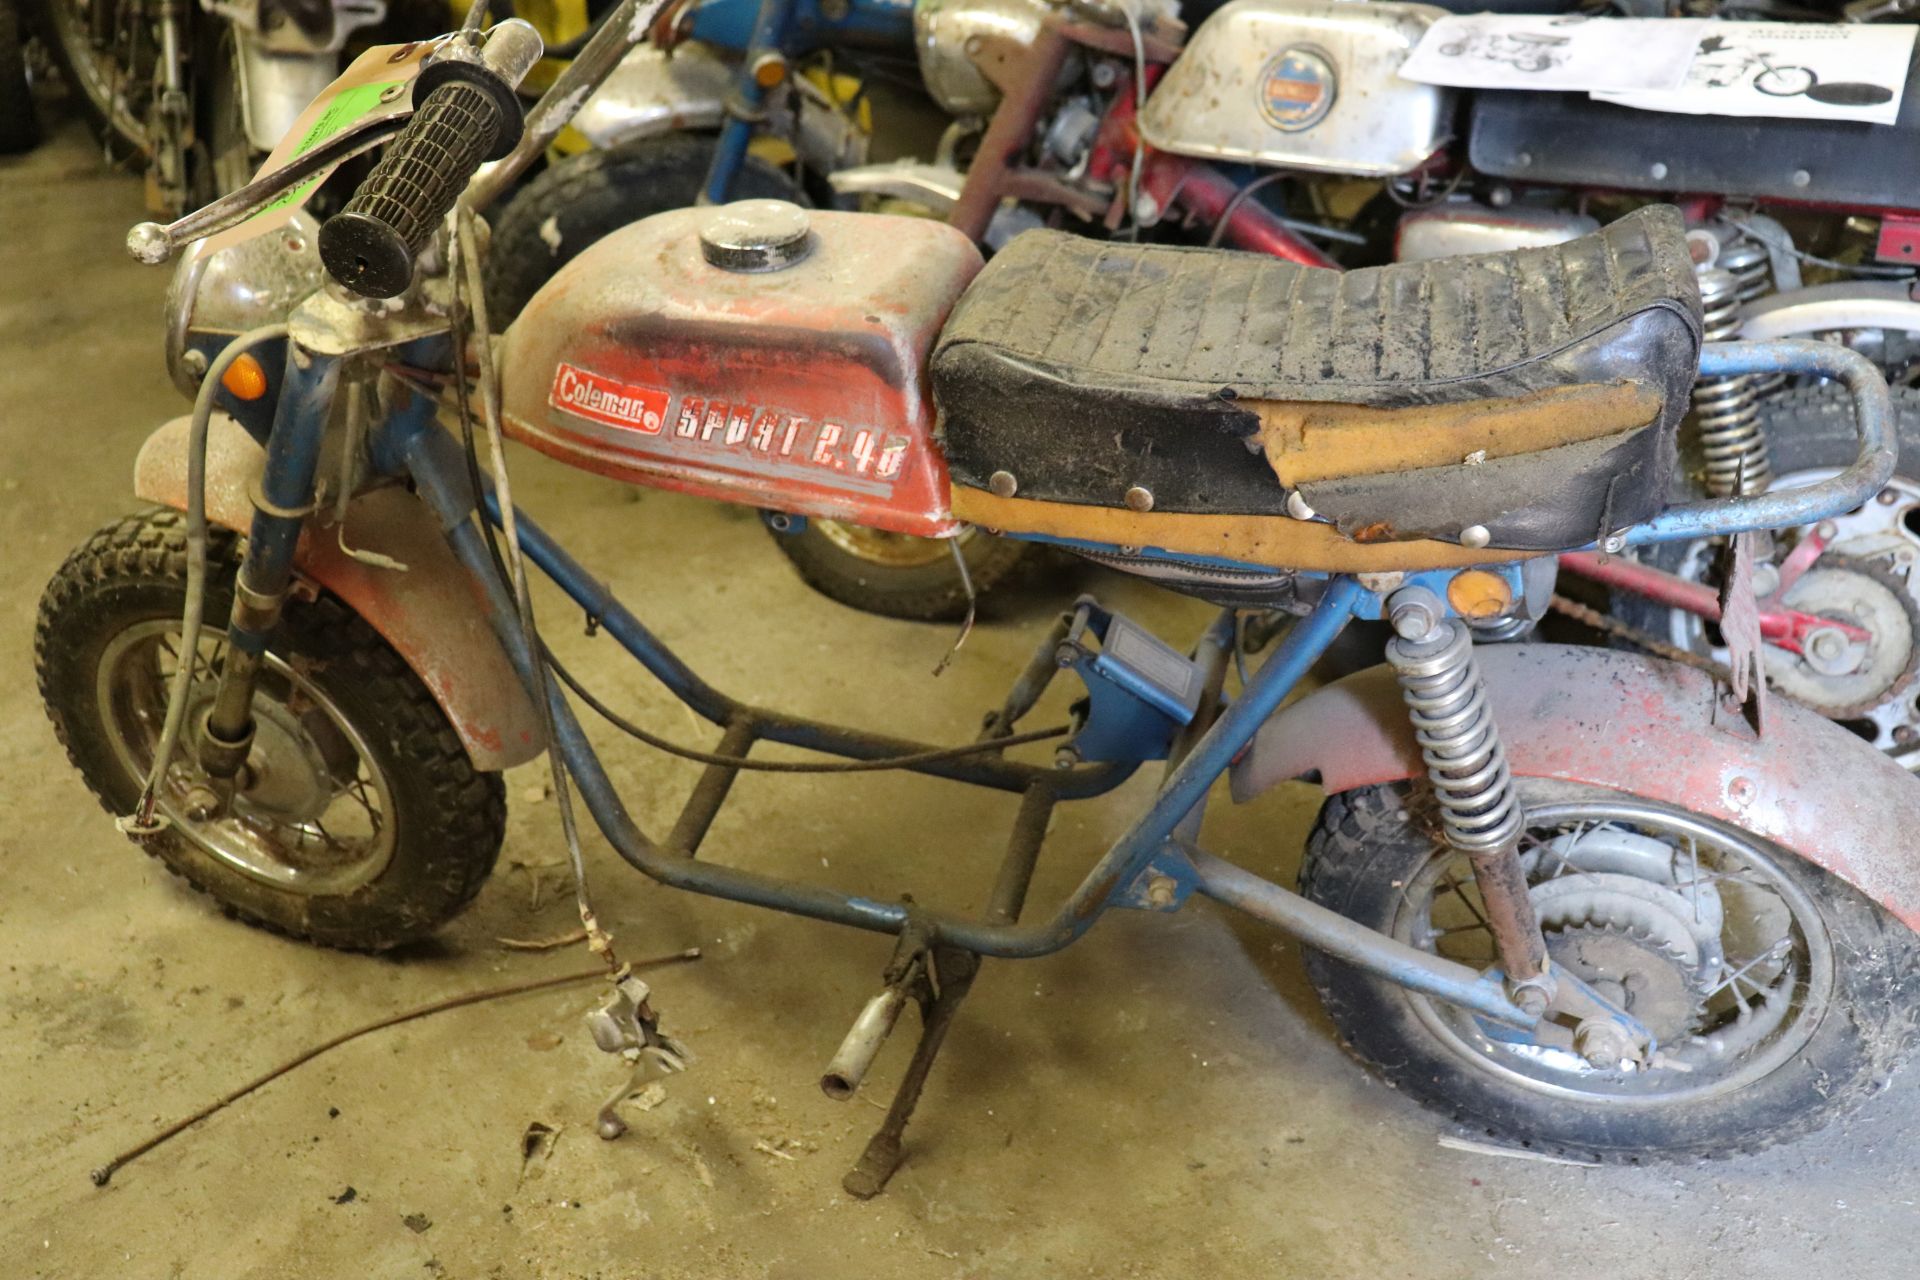 1971 Coleman Sport 240 rolling chassis mini bike MINI BIKES MARKED AS PARTS BIKES, NOT OPERATIONAL, - Image 2 of 4